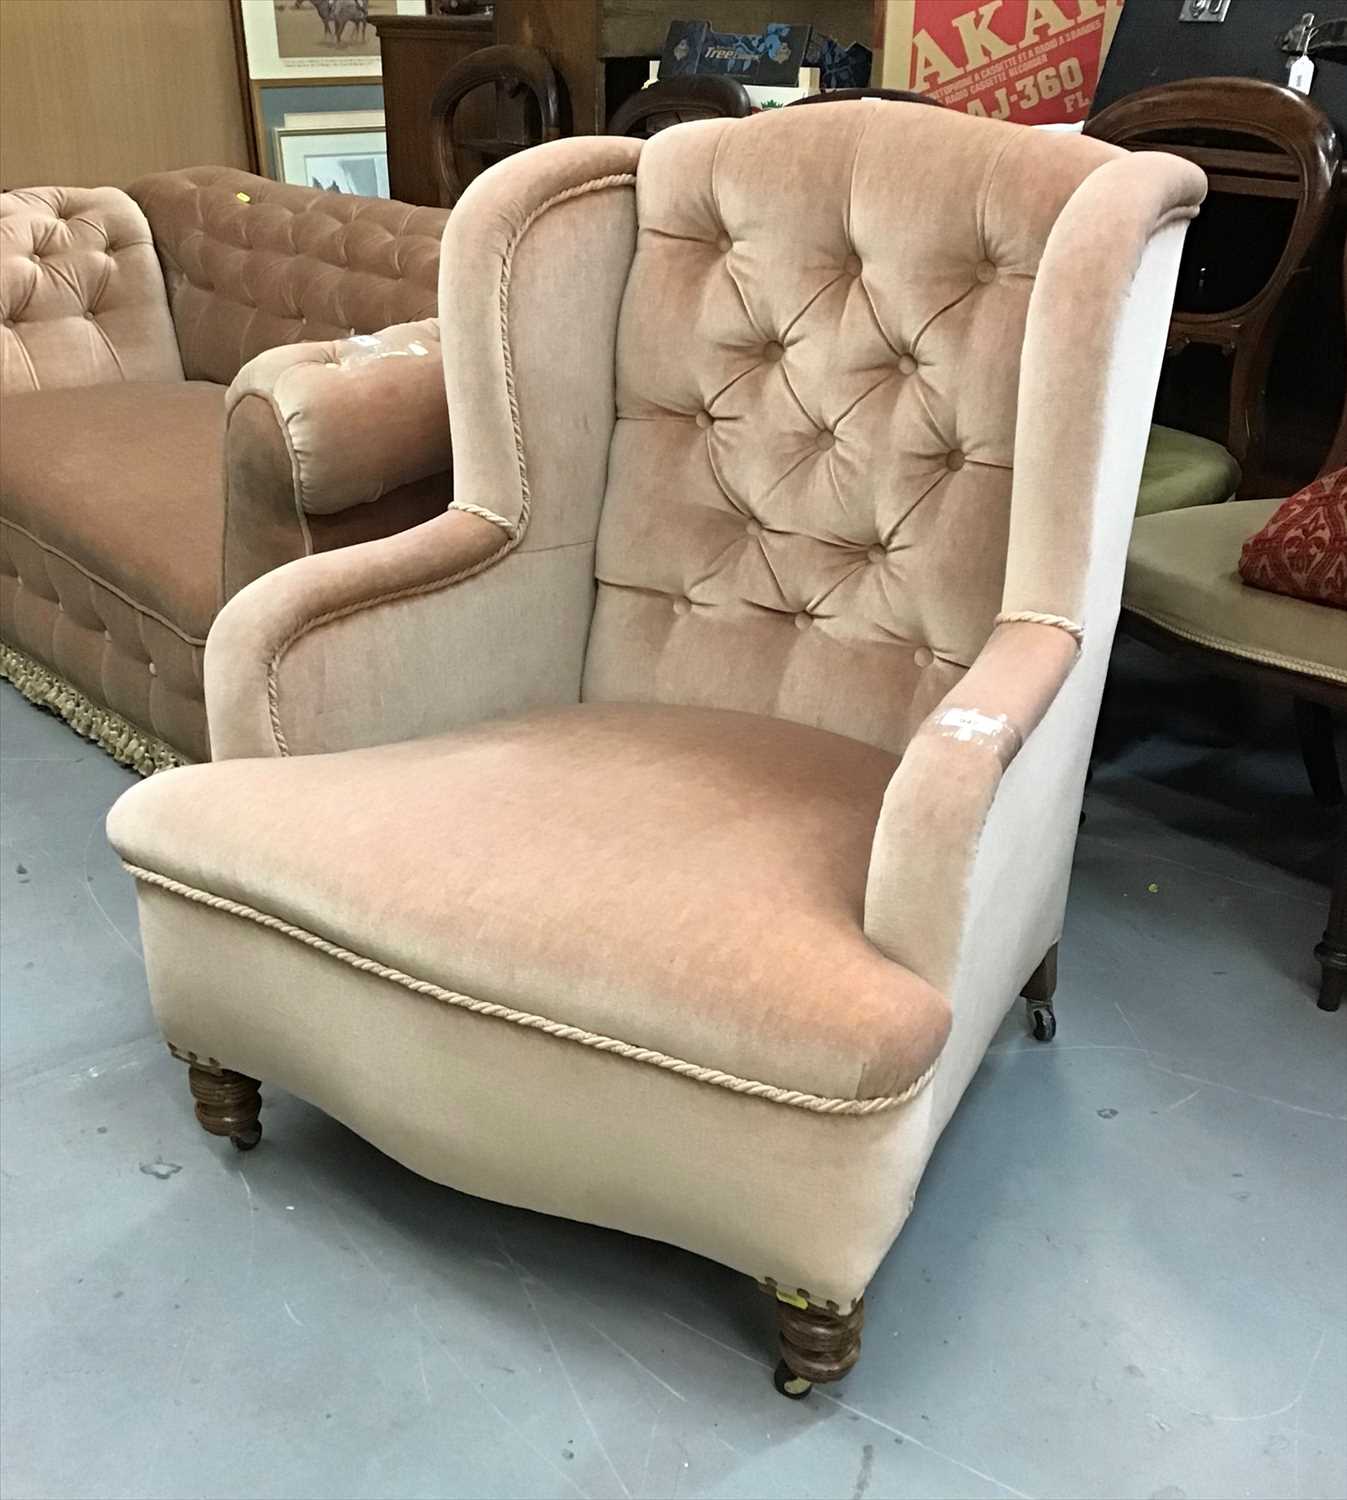 Lot 947 - Victorian wing back chair upholstered in beige buttoned material on turned front legs